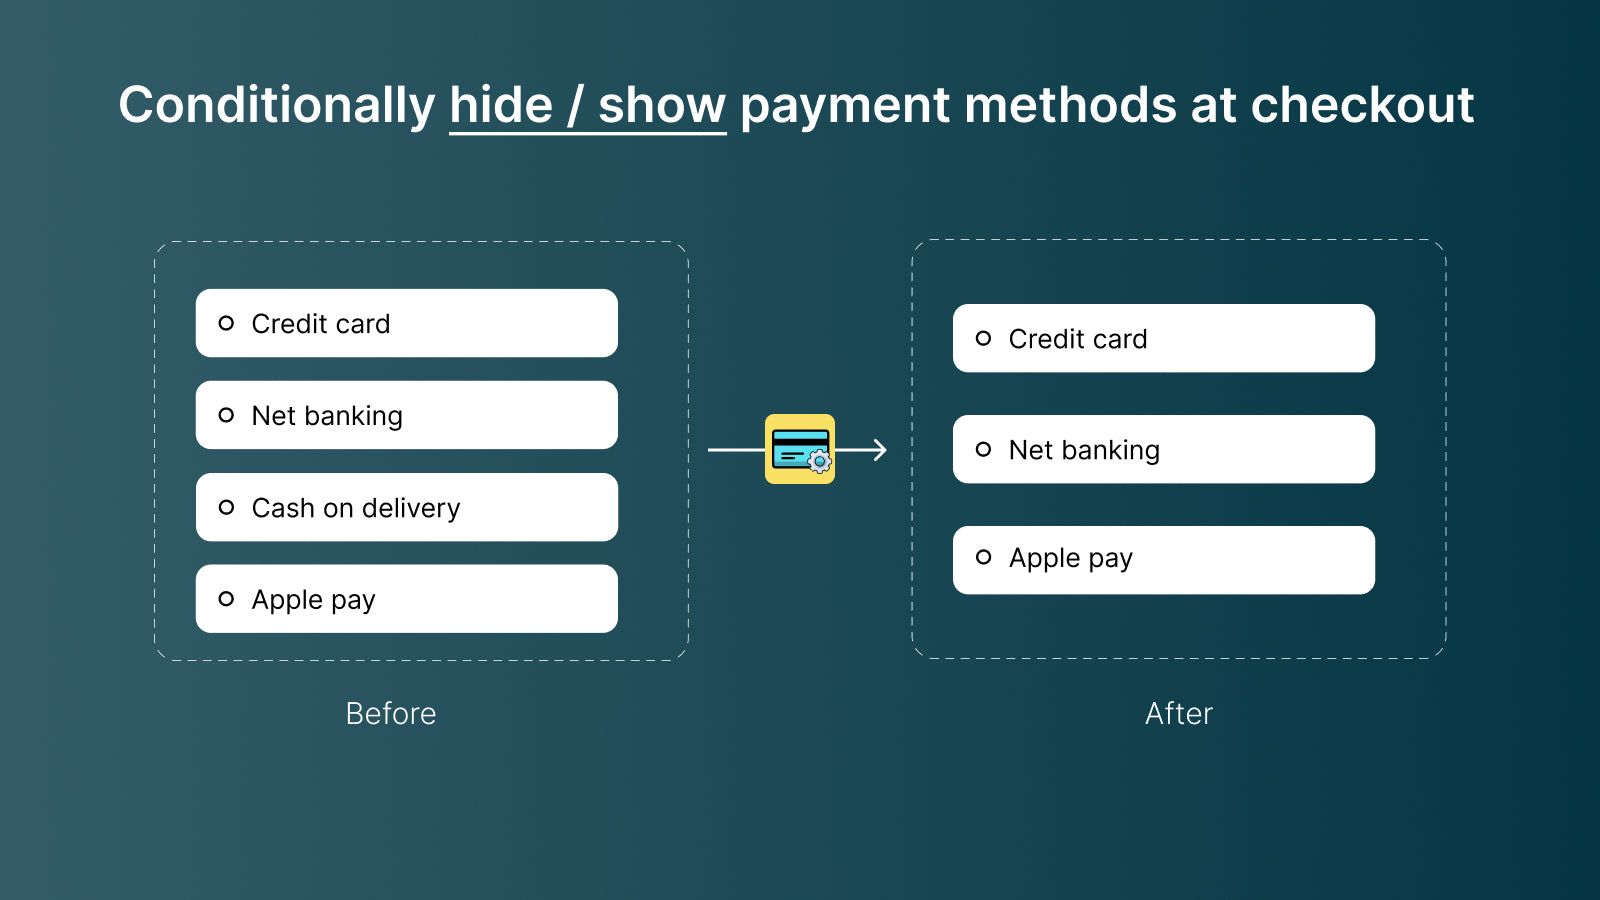 Conditionally hide / show payment methods